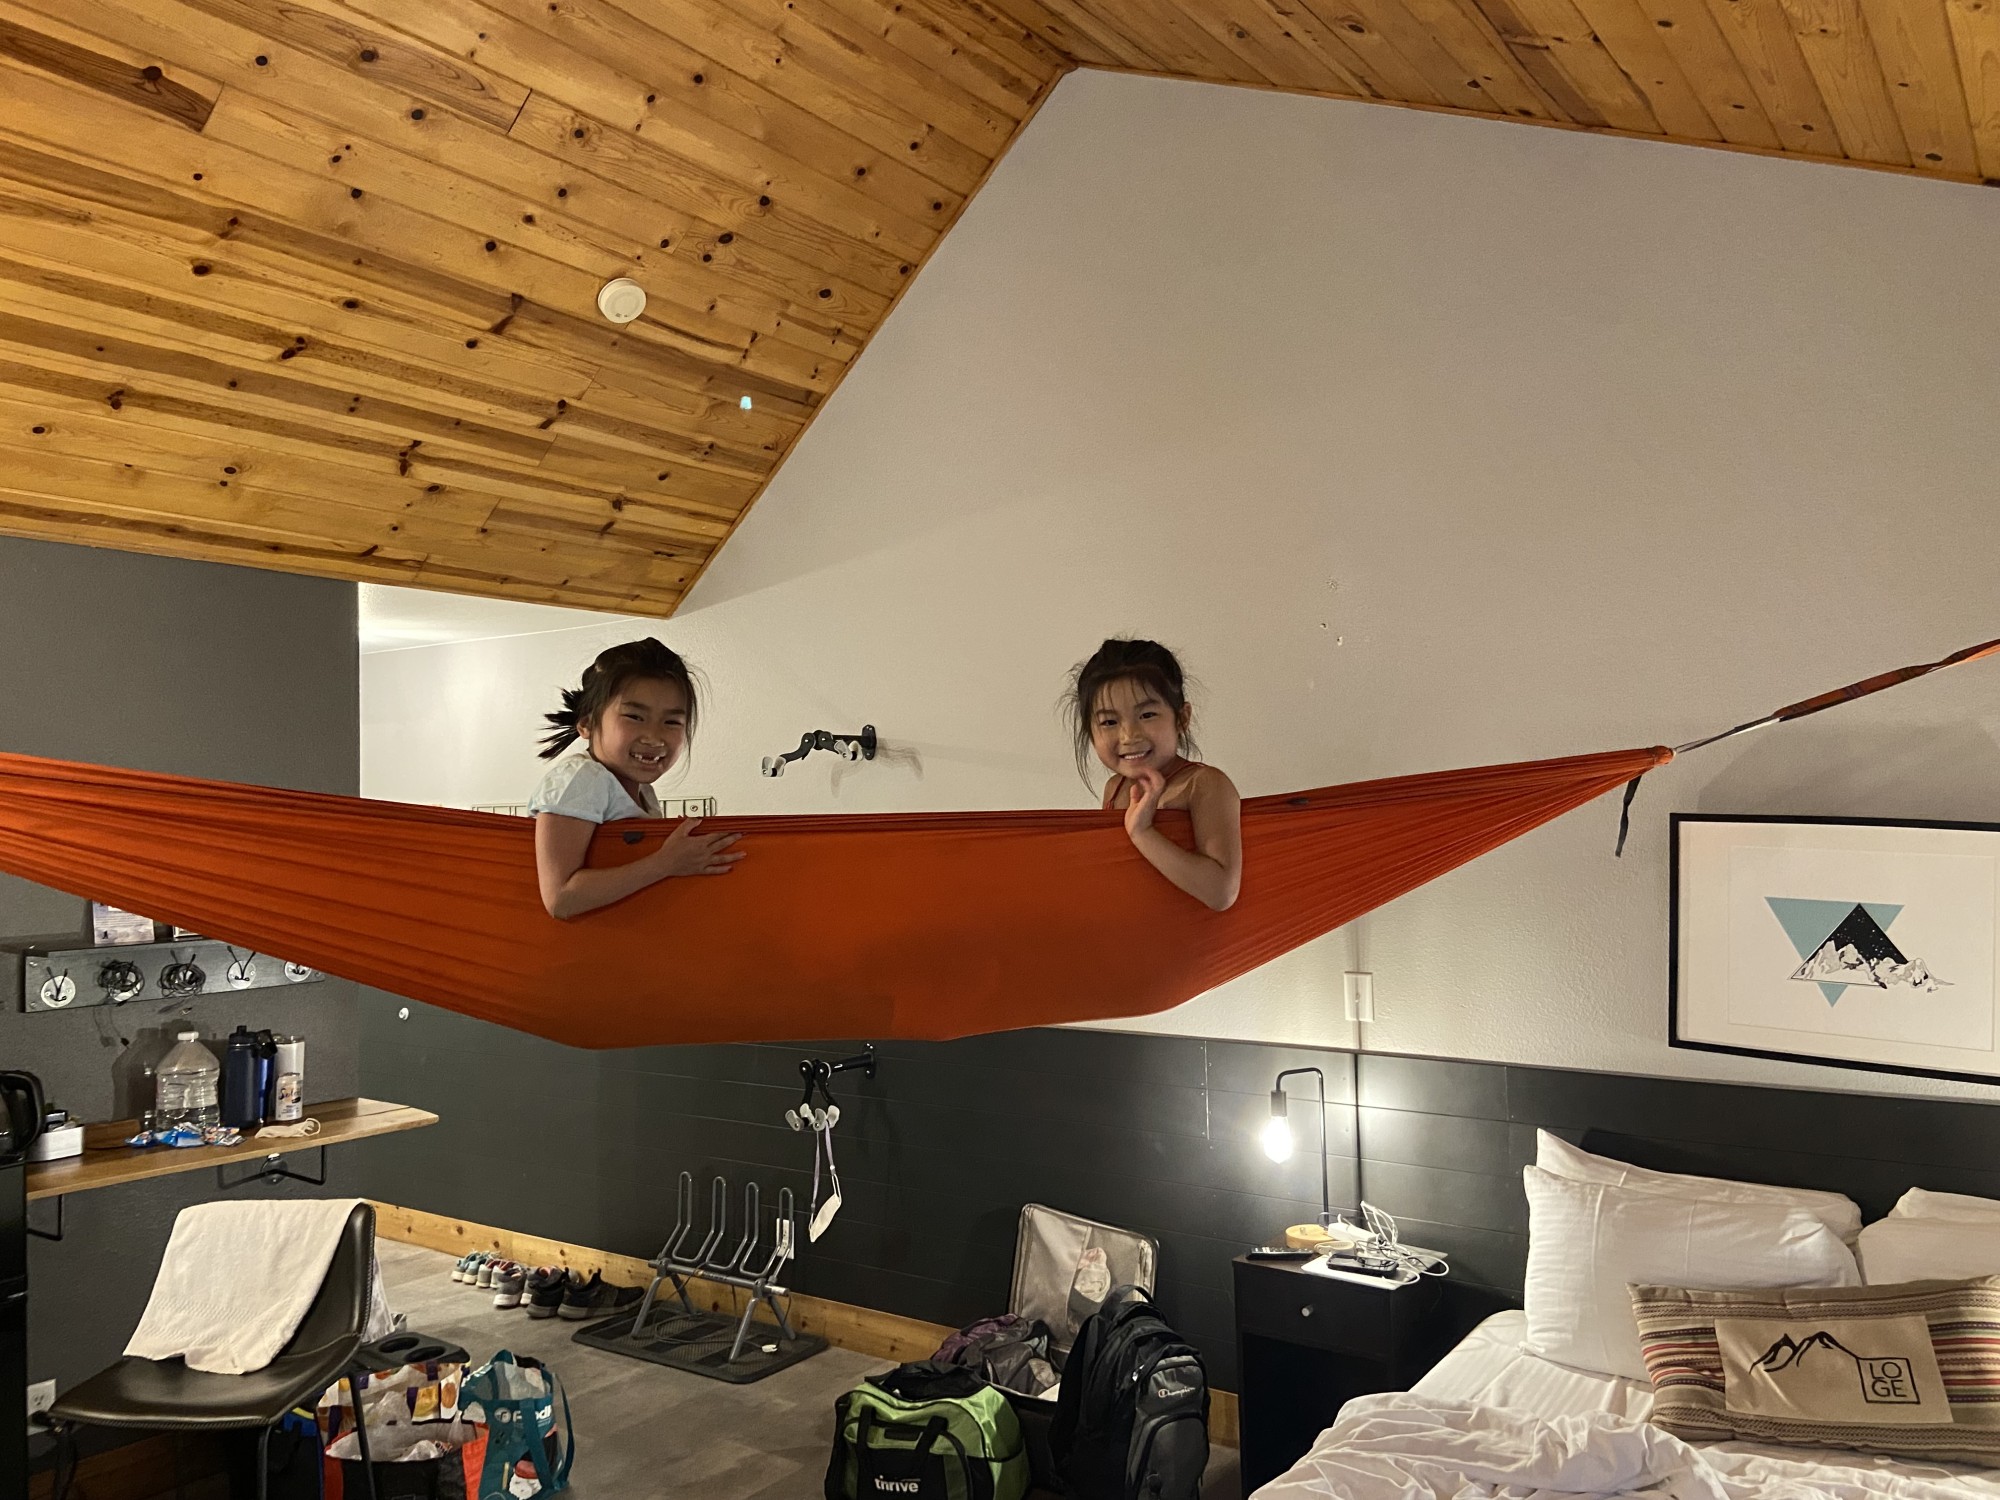 In Mt Shasta we got to stay in a super cool hotel with a hammock right in the middle of the room!!!